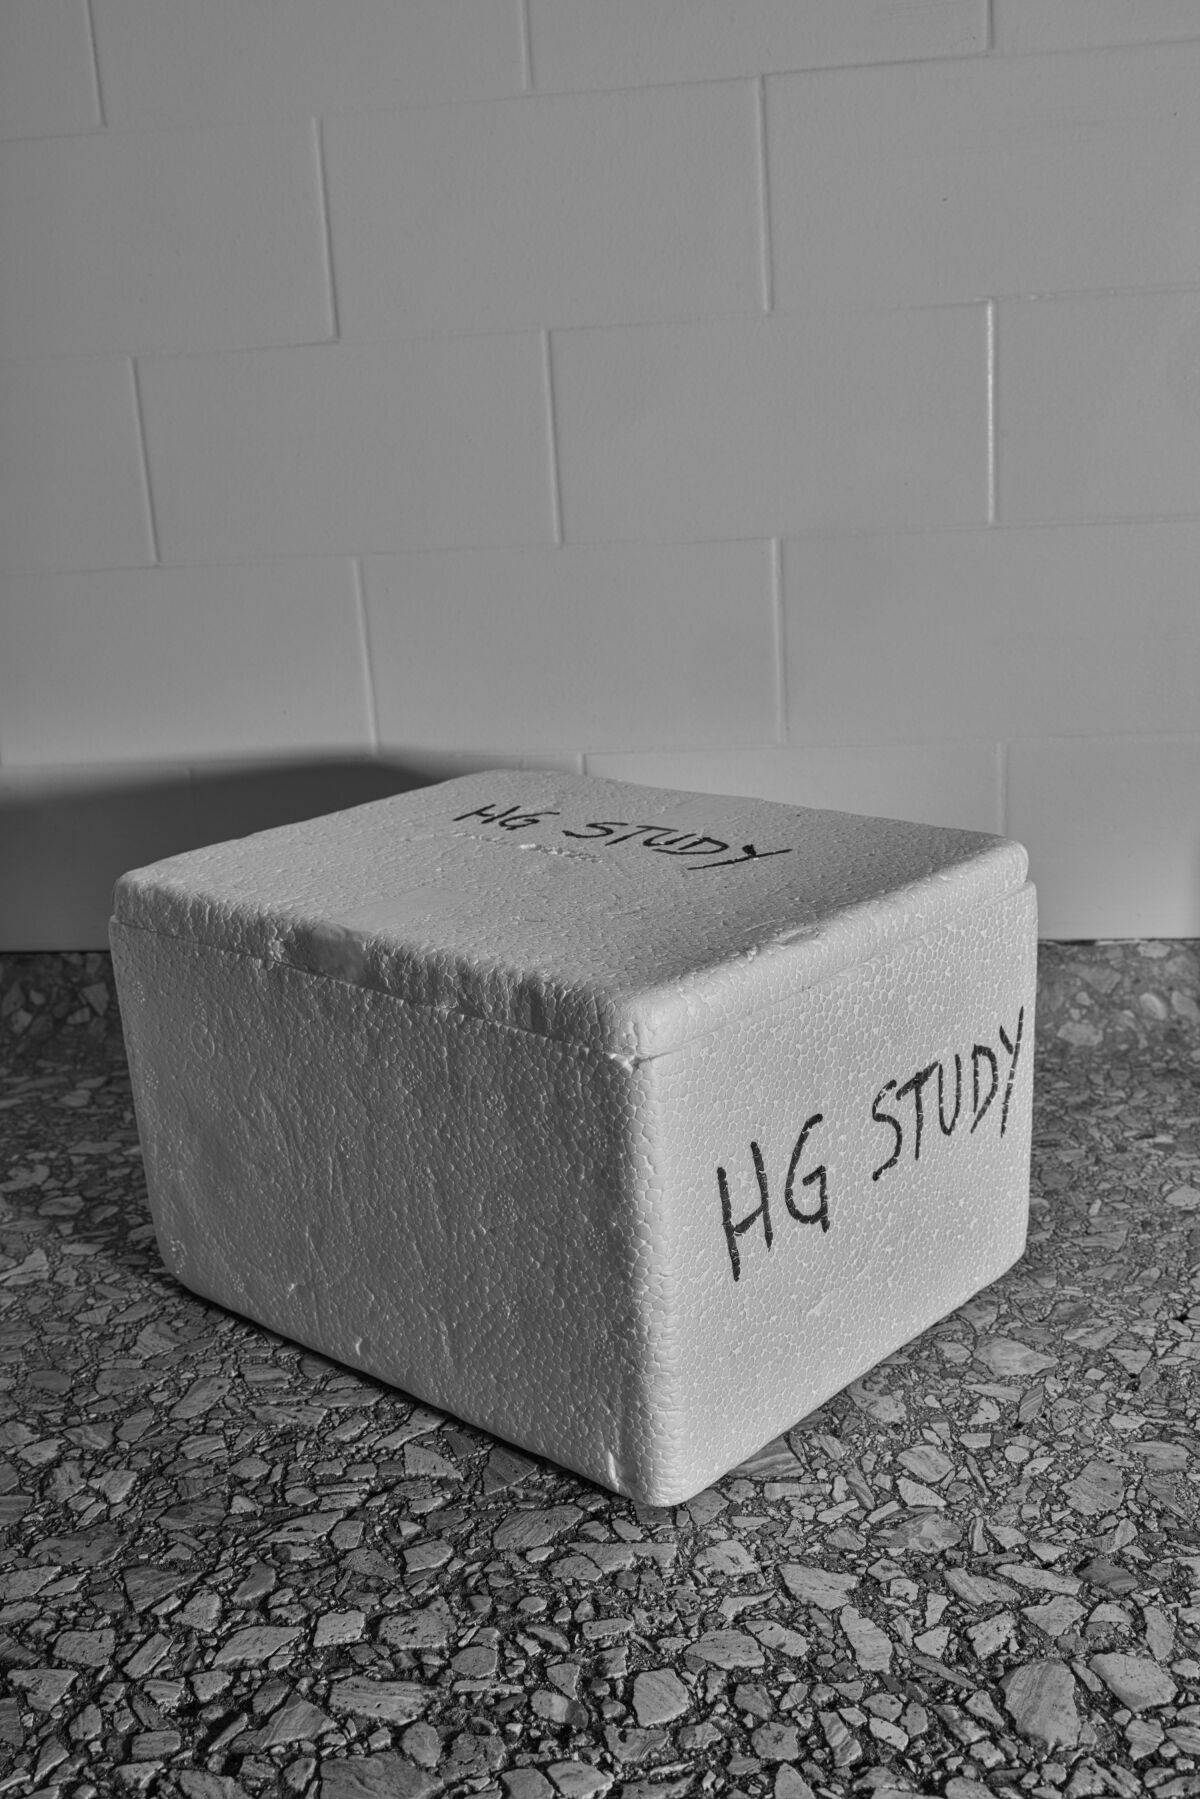 A styrofoam box used in research.